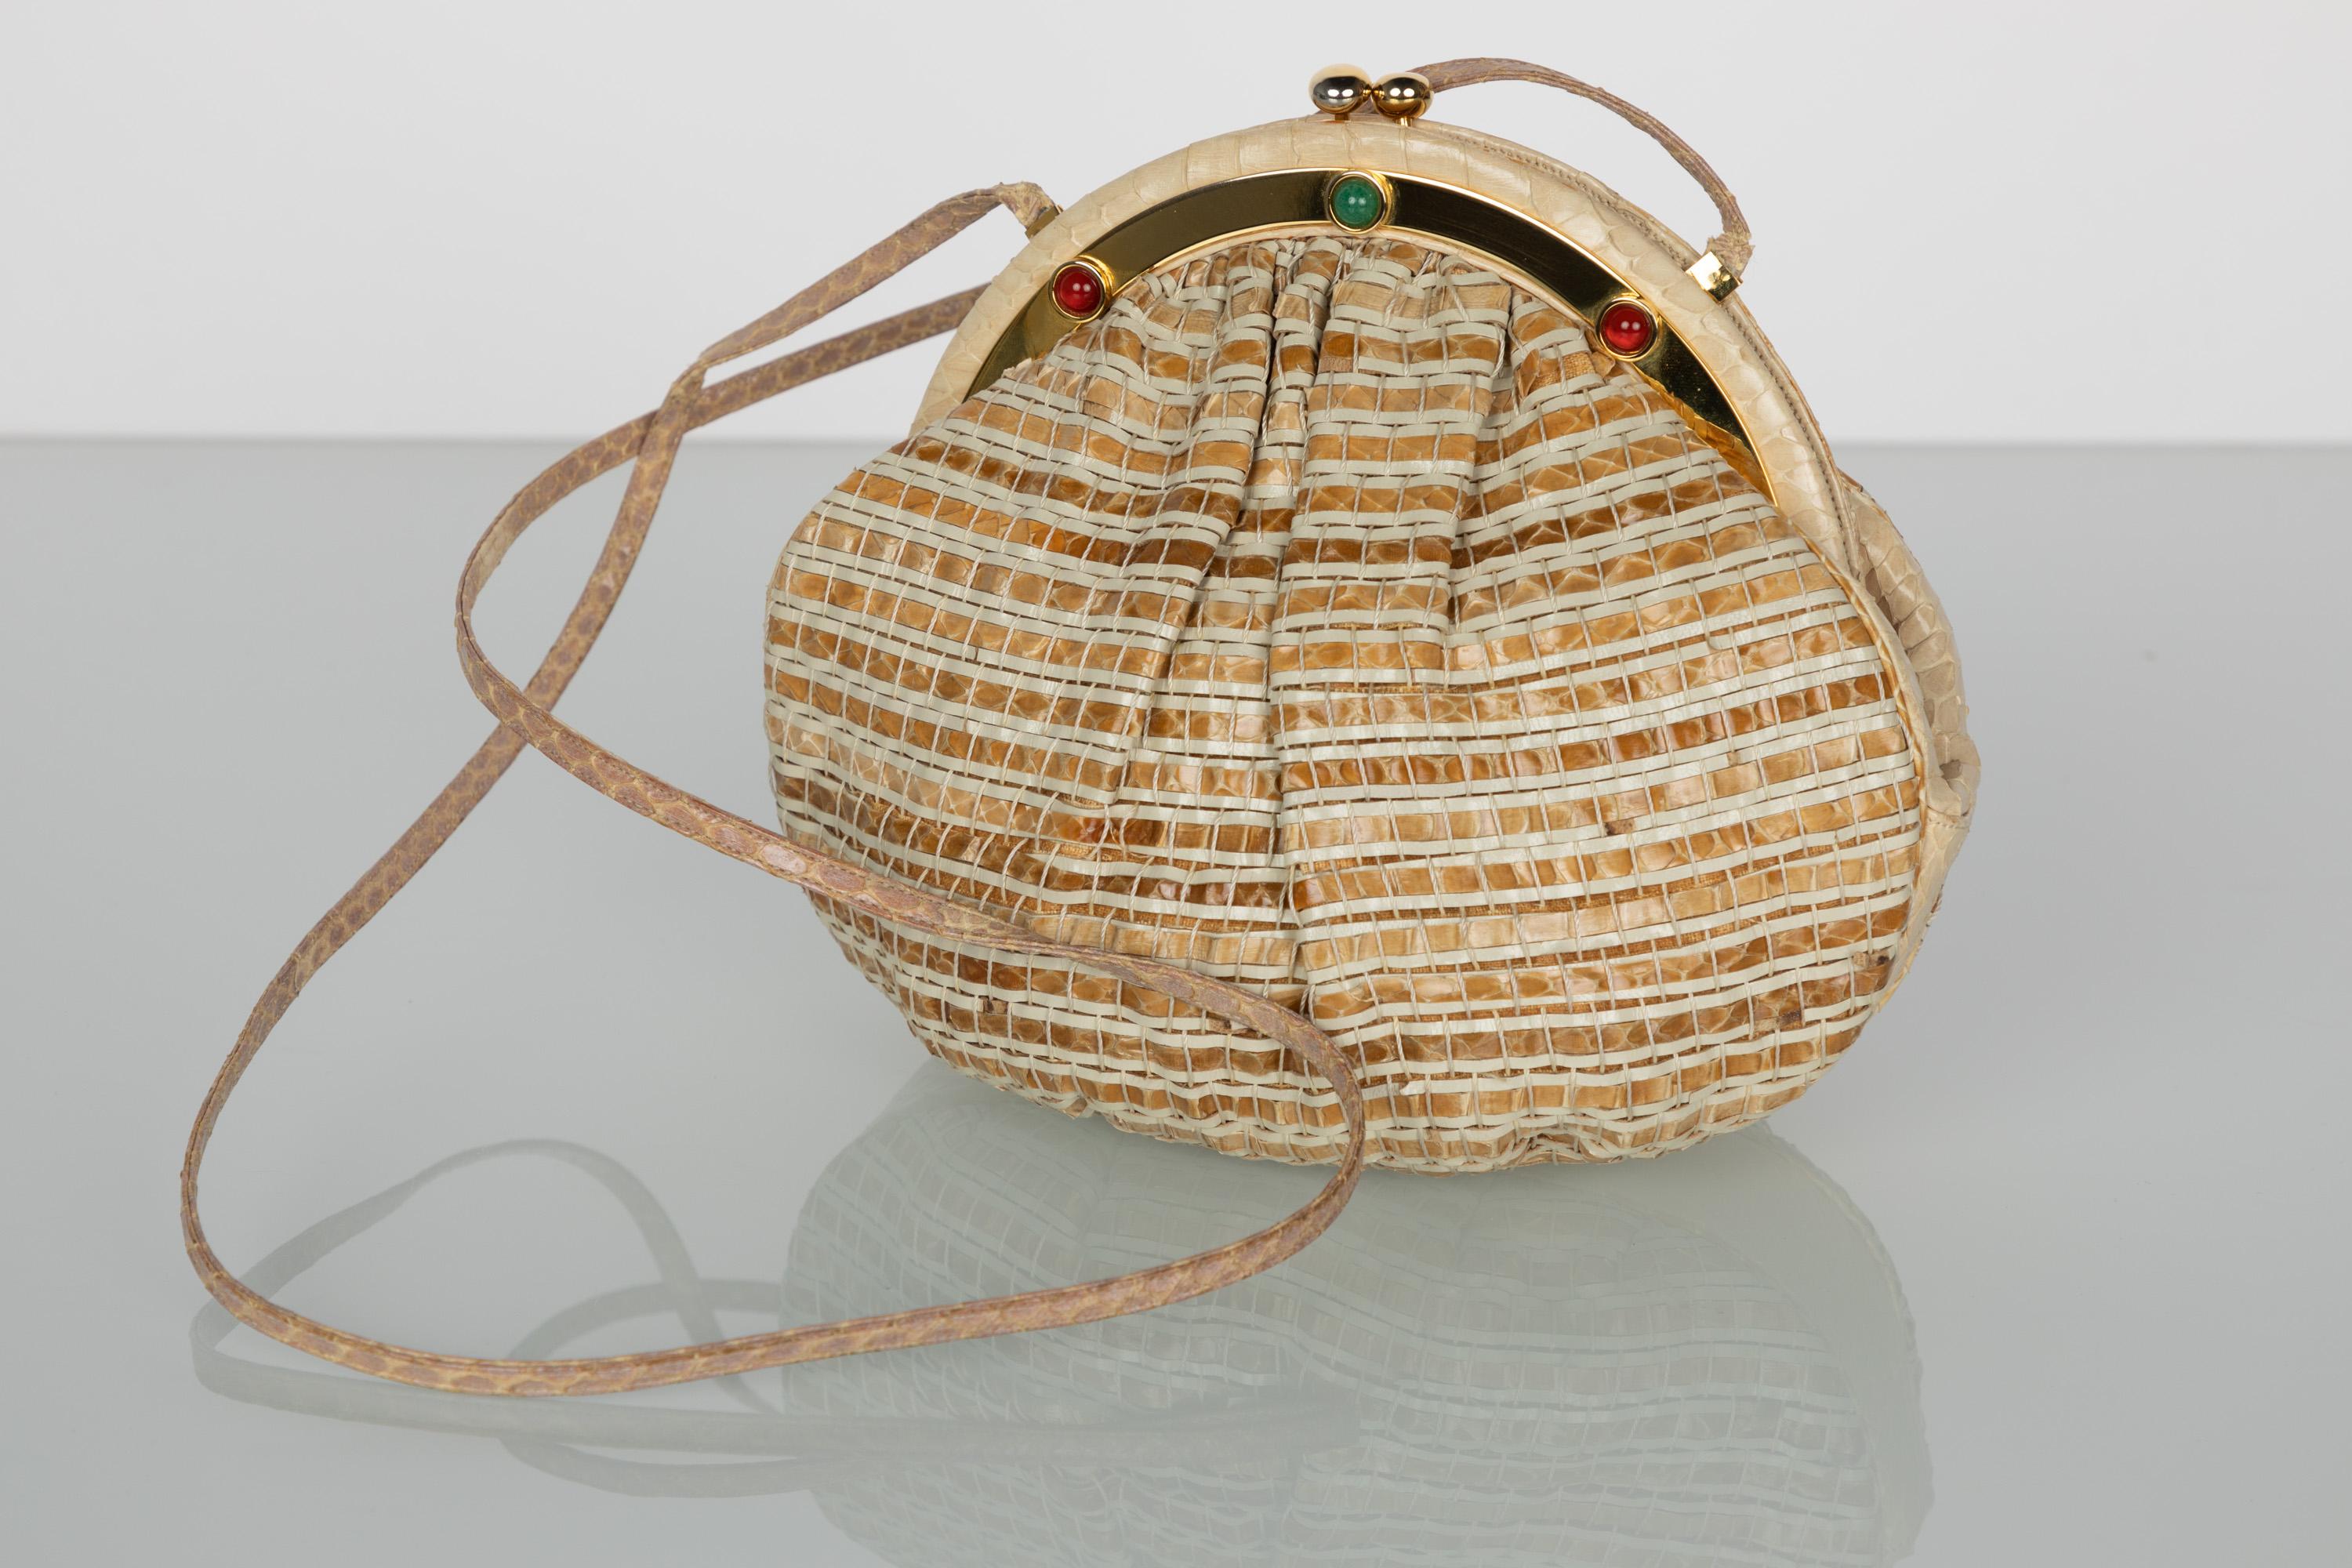  Judith Leiber Limited Edition Woven Snakeskin Clutch Bag In Good Condition For Sale In Boca Raton, FL